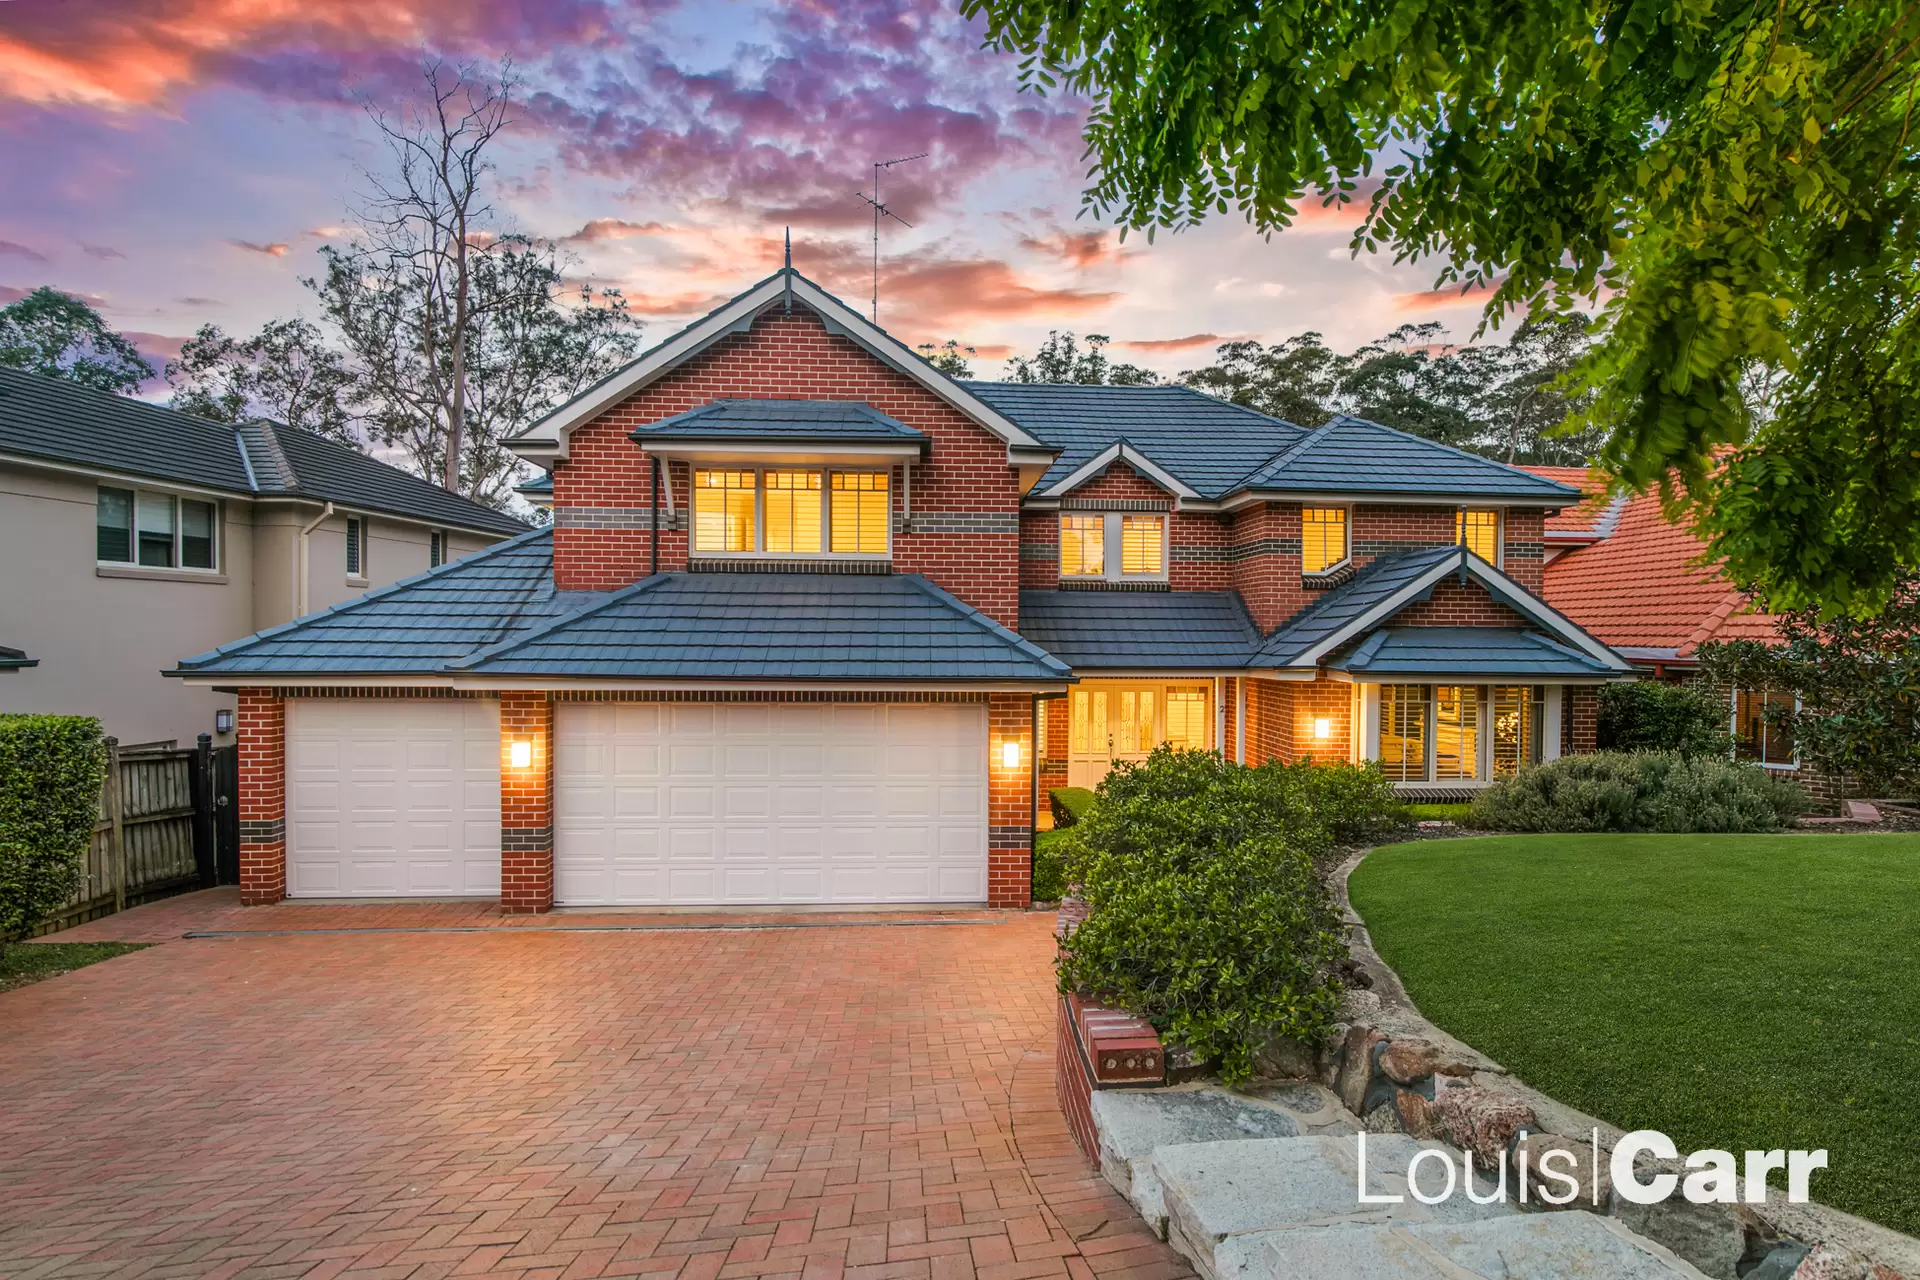 Photo #1: 2 Rodney Place, West Pennant Hills - Sold by Louis Carr Real Estate